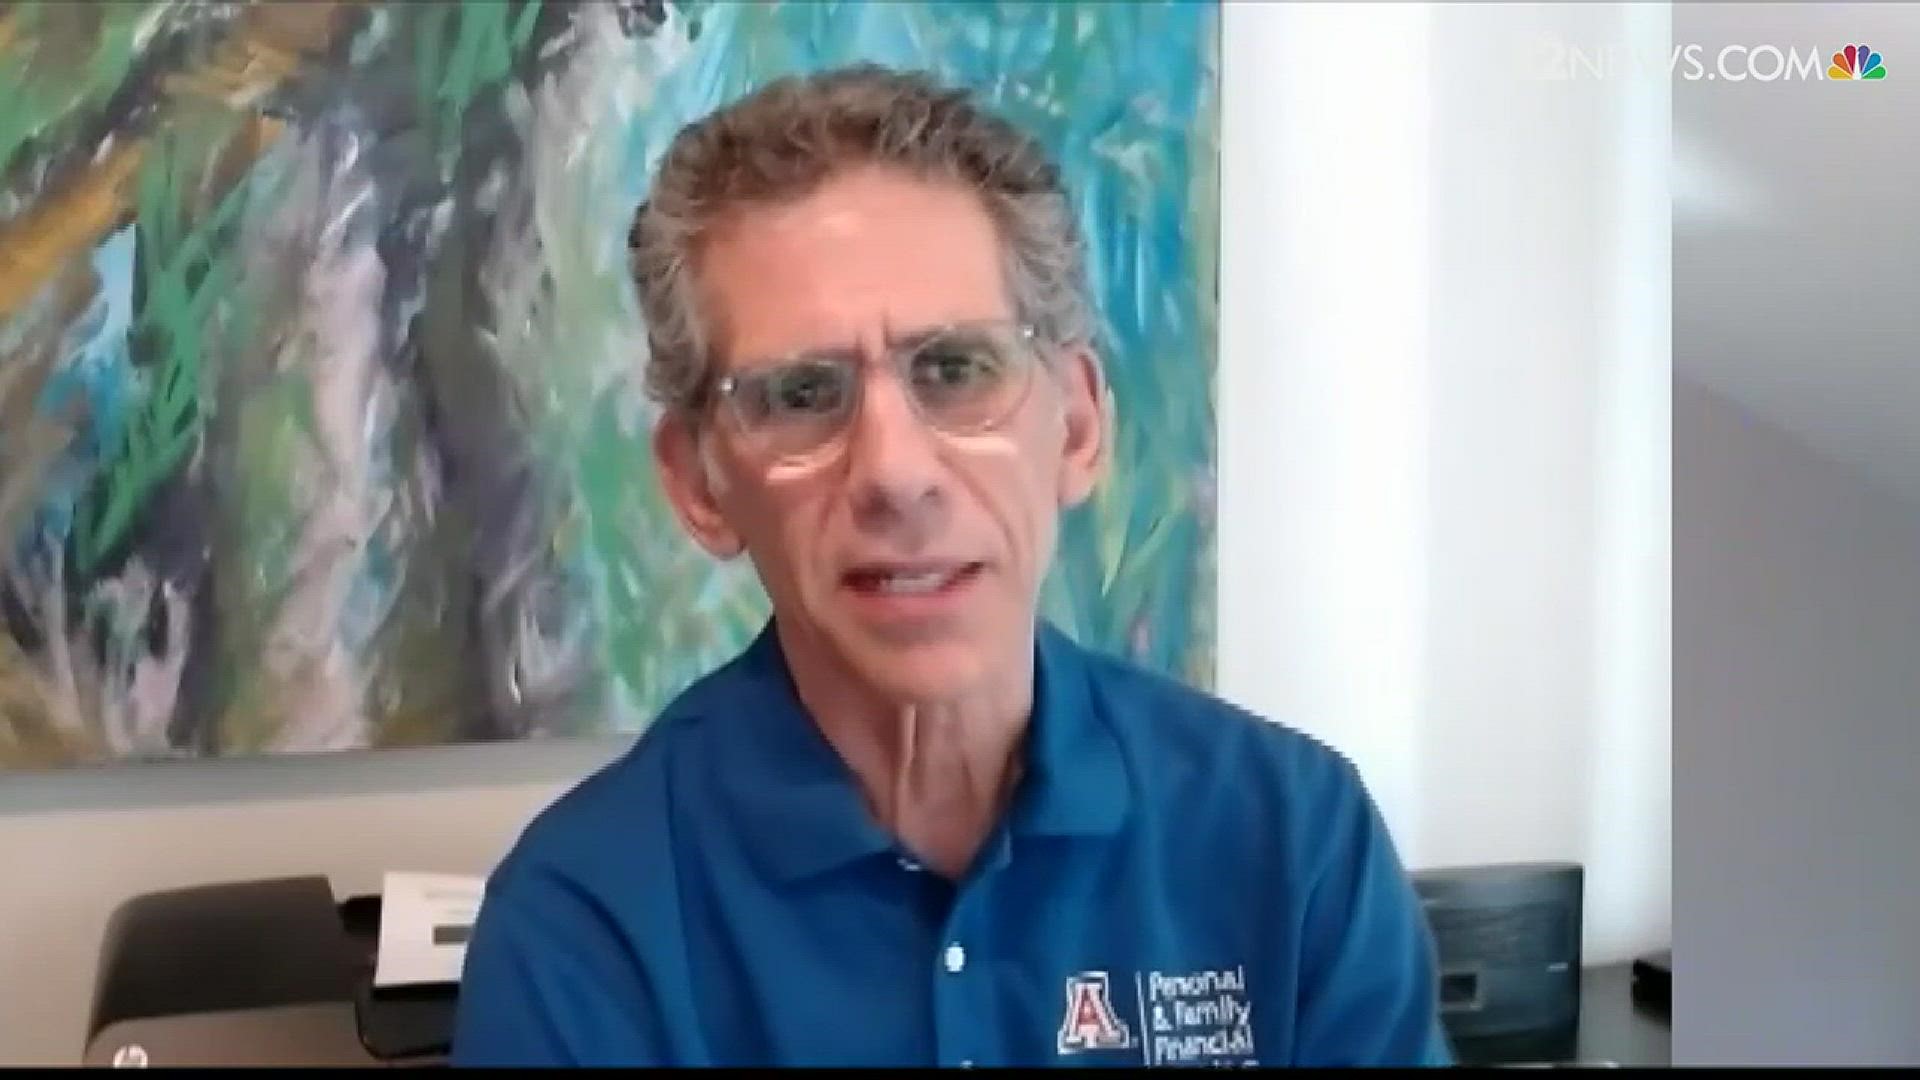 With thousands facing severely limited income or being laid off altogether, University of Arizona finance professor Rick Rosen has a word of advice: save money.